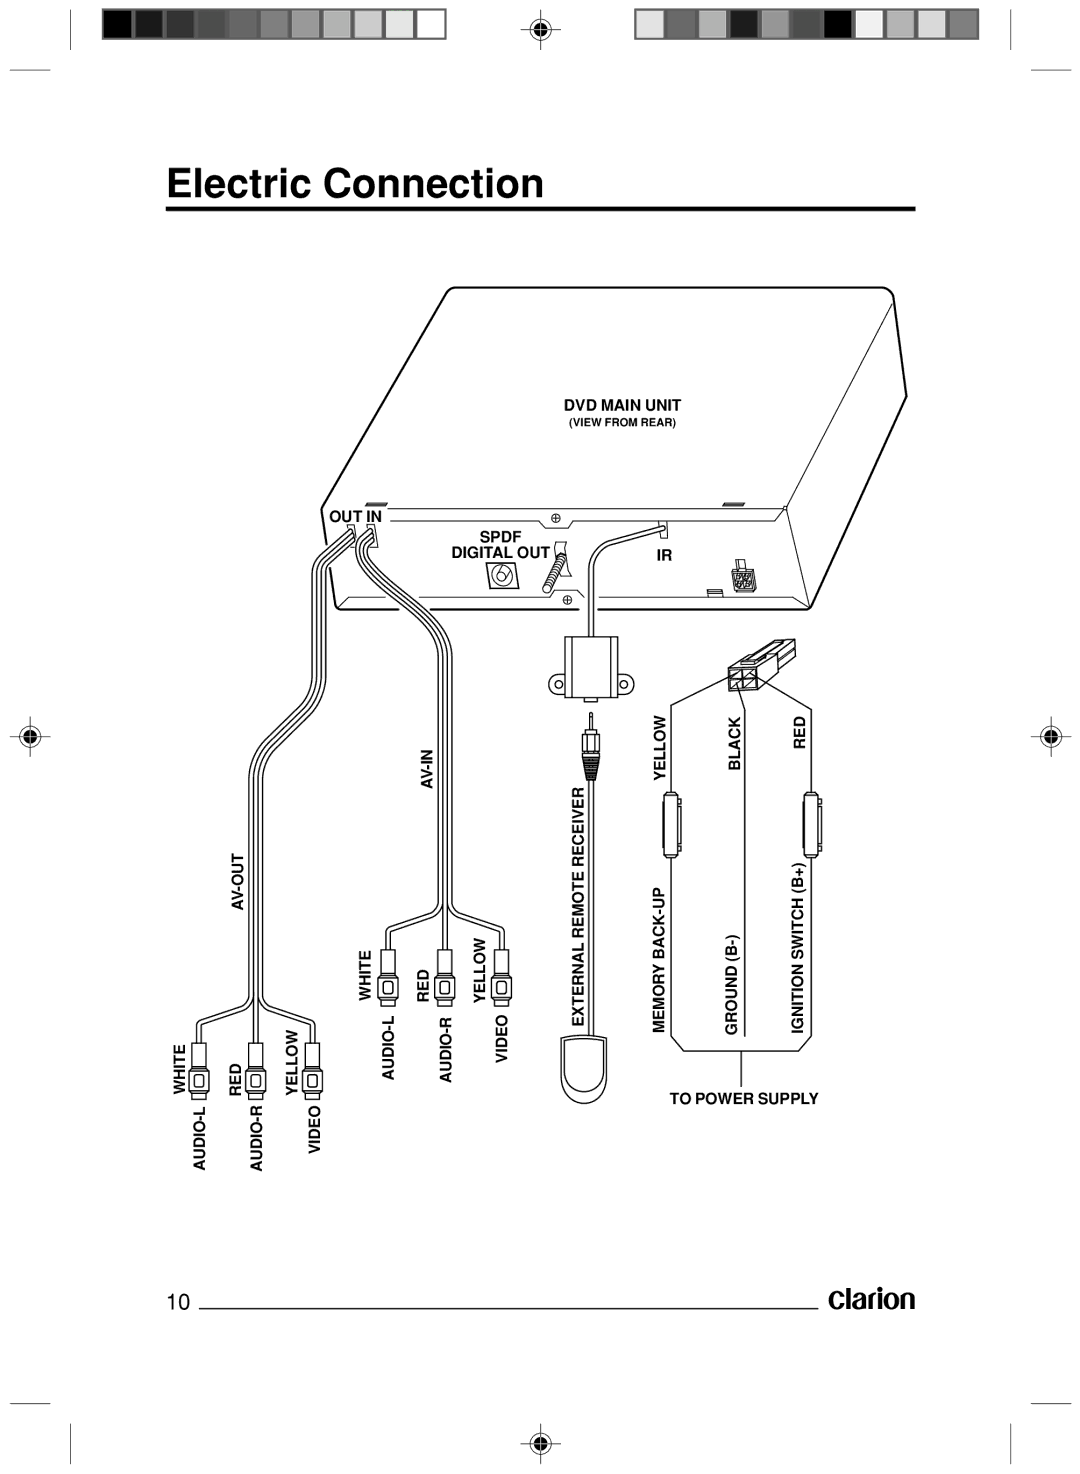 Clarion VS738 owner manual Electric Connection 